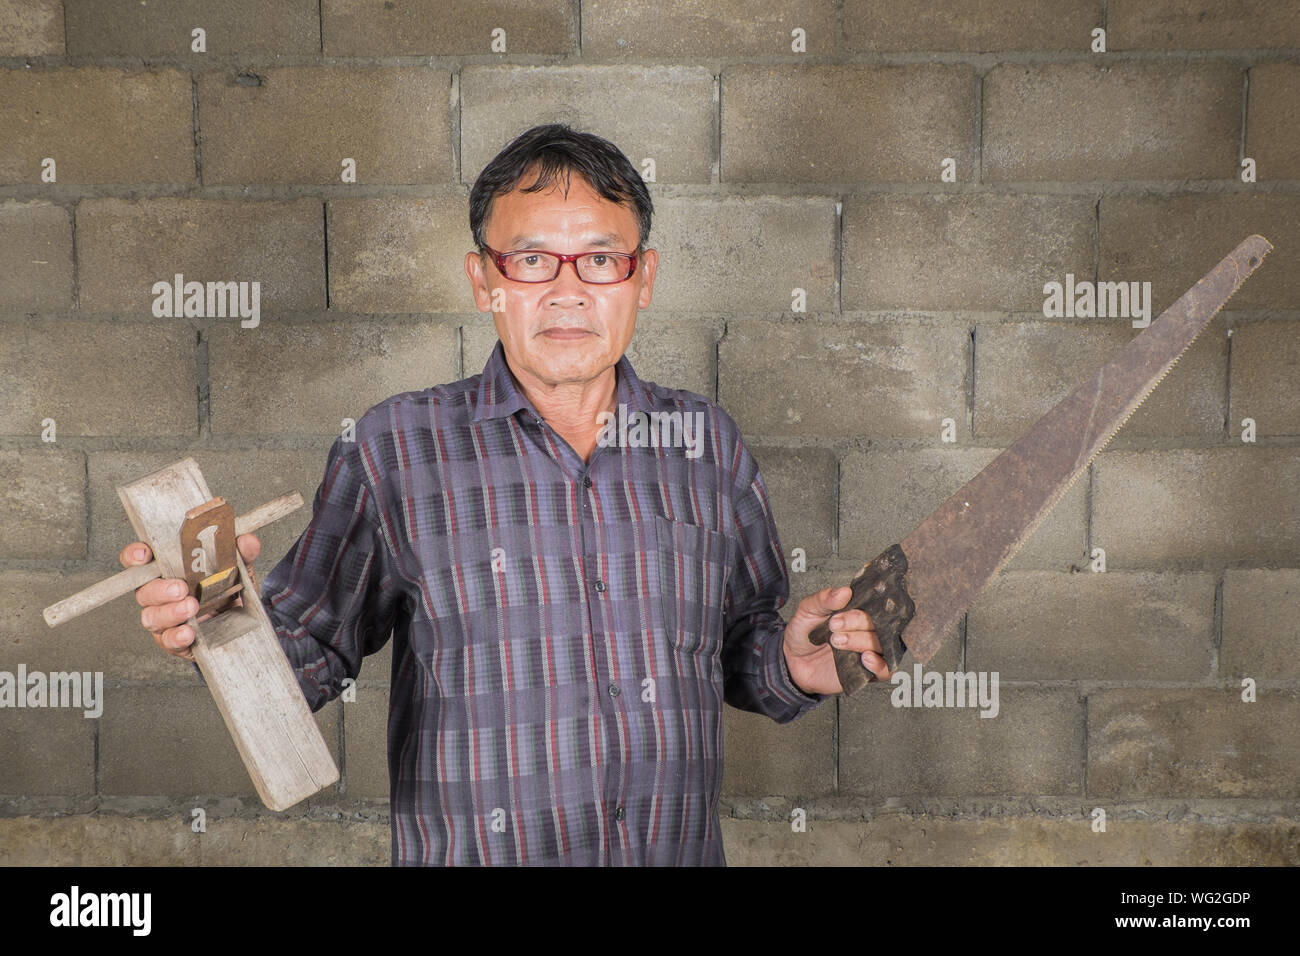 Portrait Of Carpenter Wearing Eyeglasses Holding Work Tools Against Wall Stock Photo